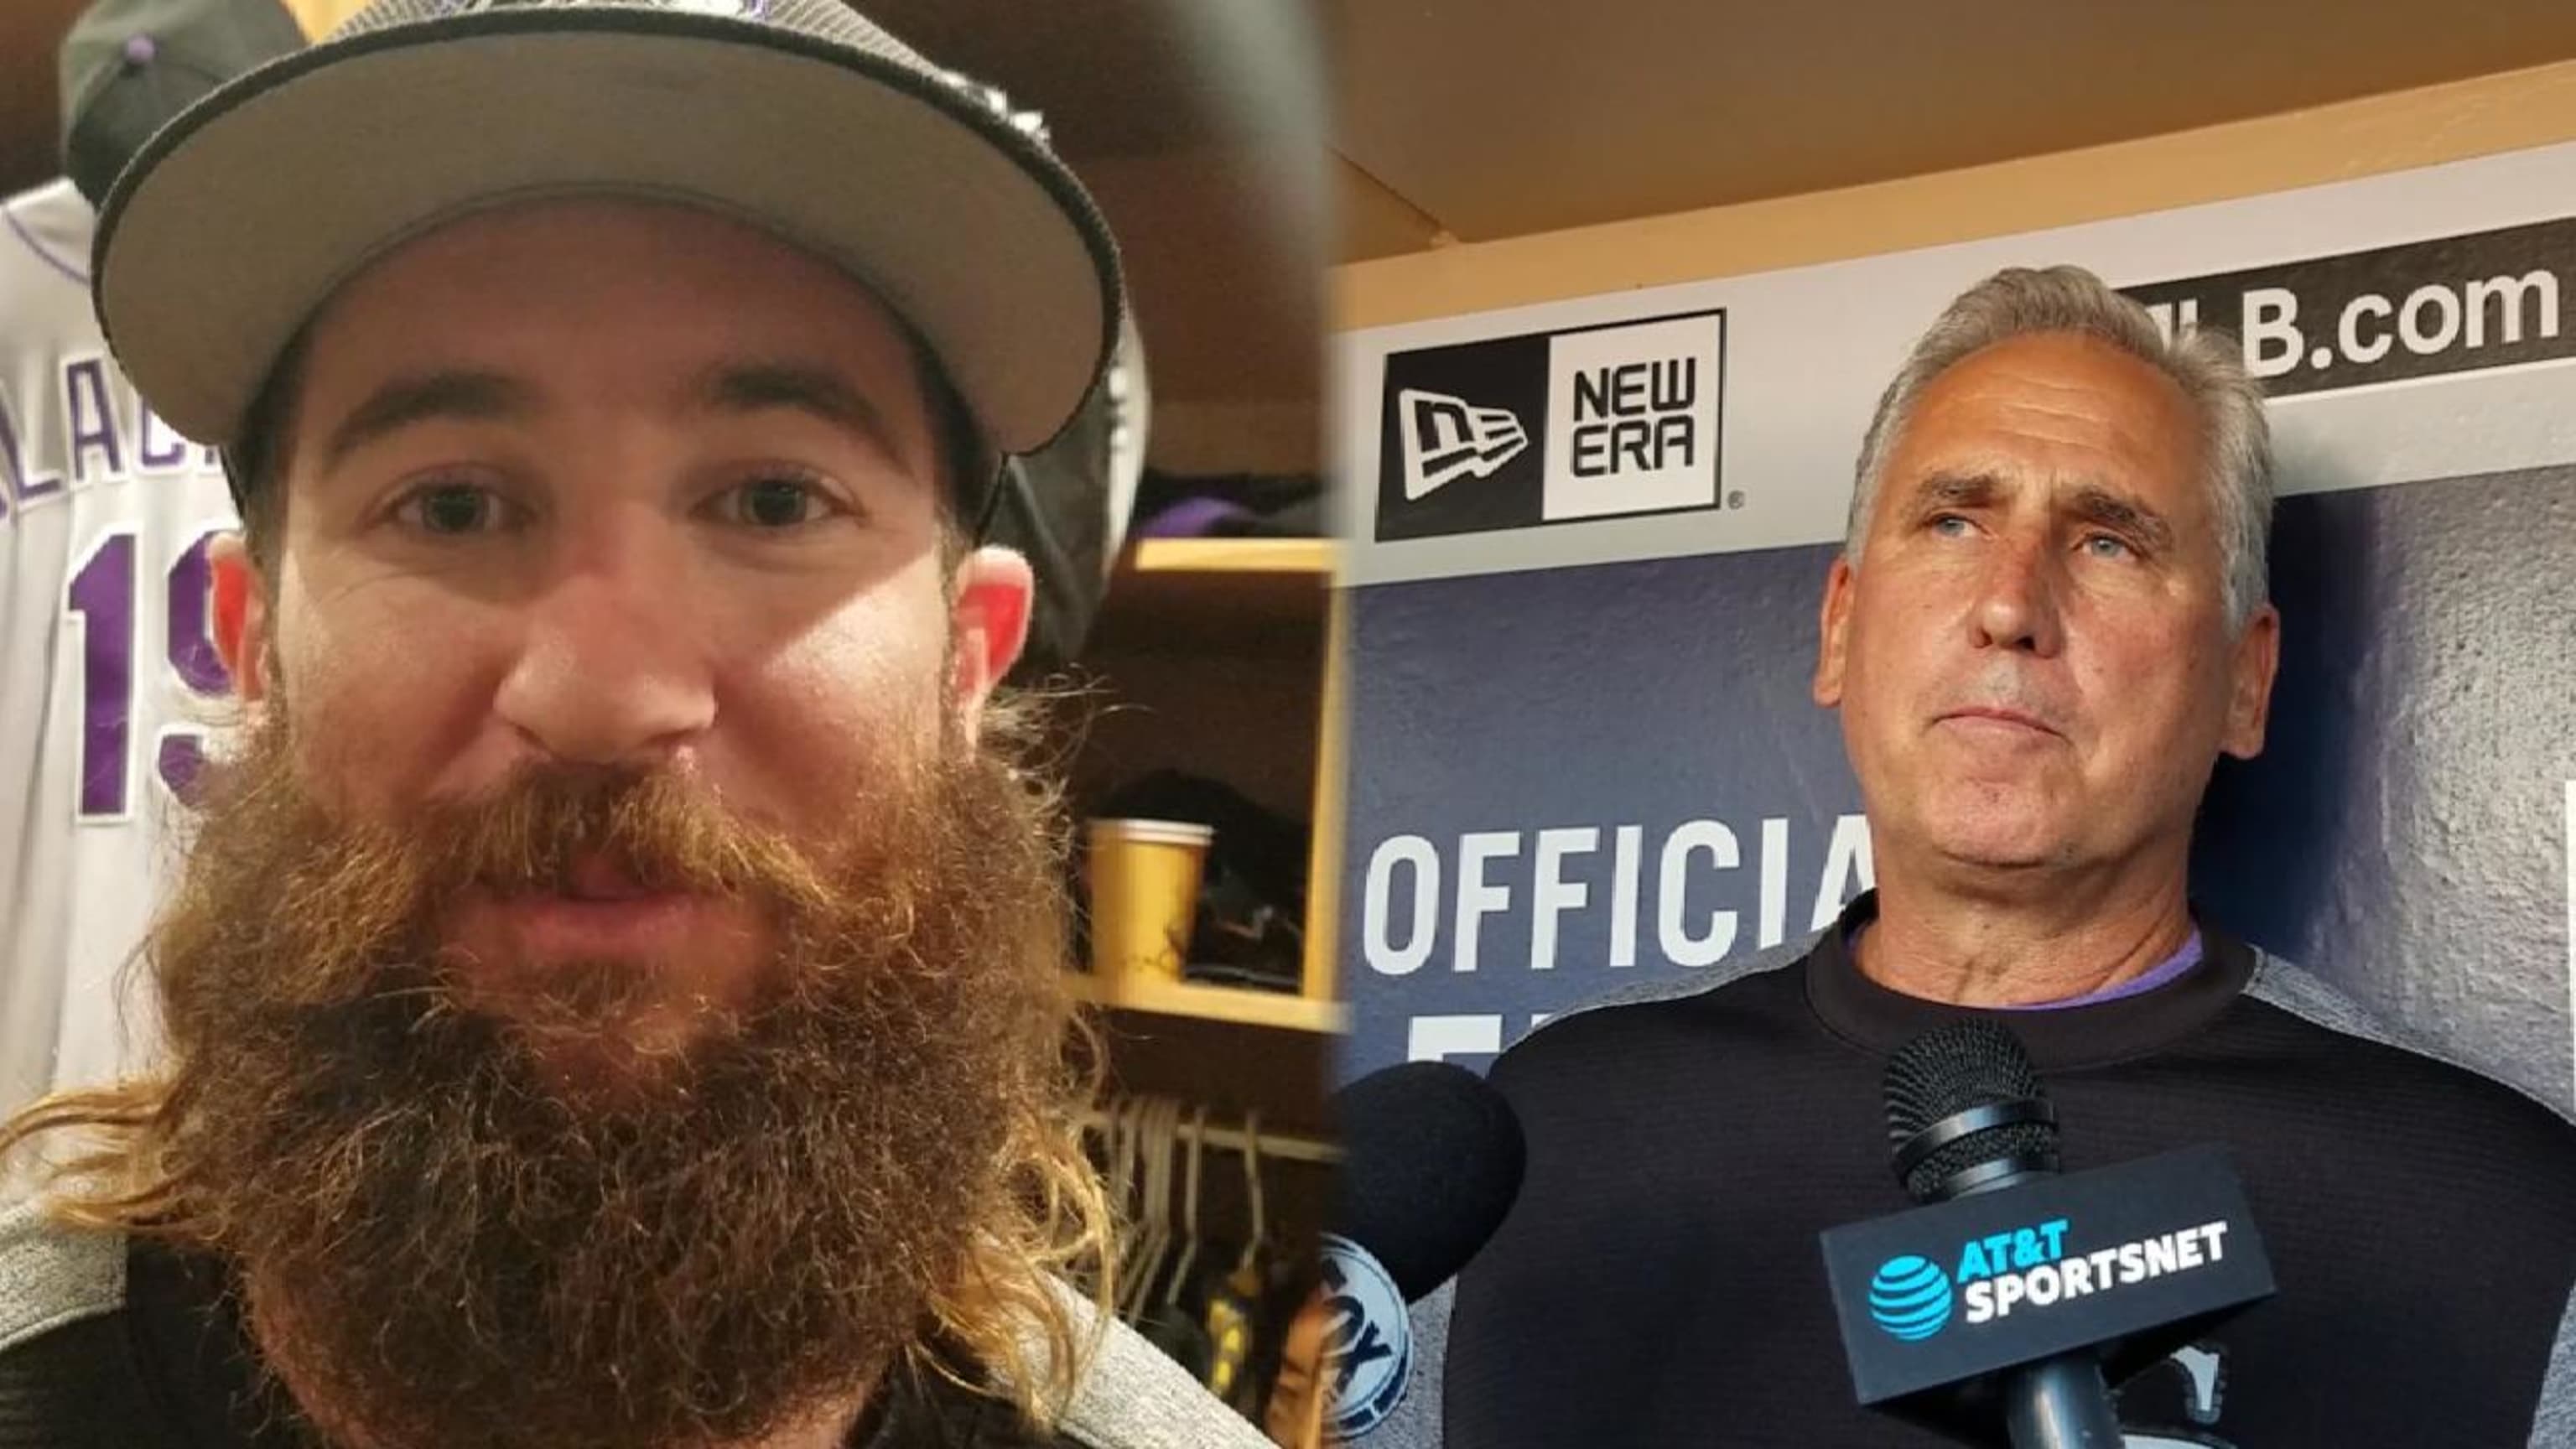 Charlie Blackmon A Completely Different Player With The Beard - CBS Colorado